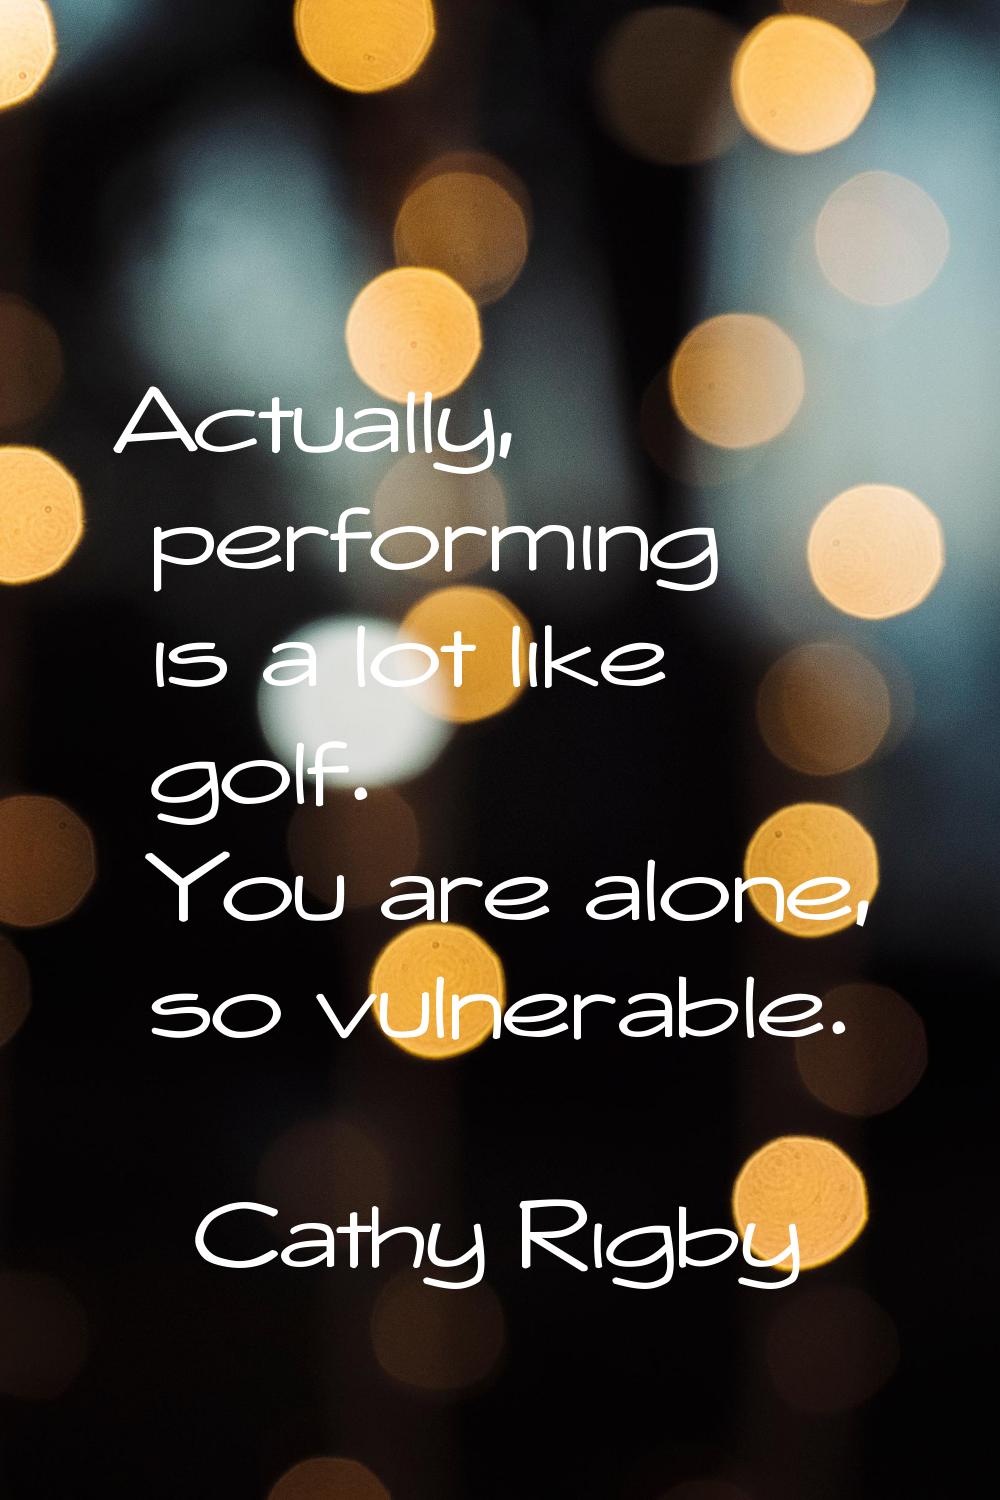 Actually, performing is a lot like golf. You are alone, so vulnerable.